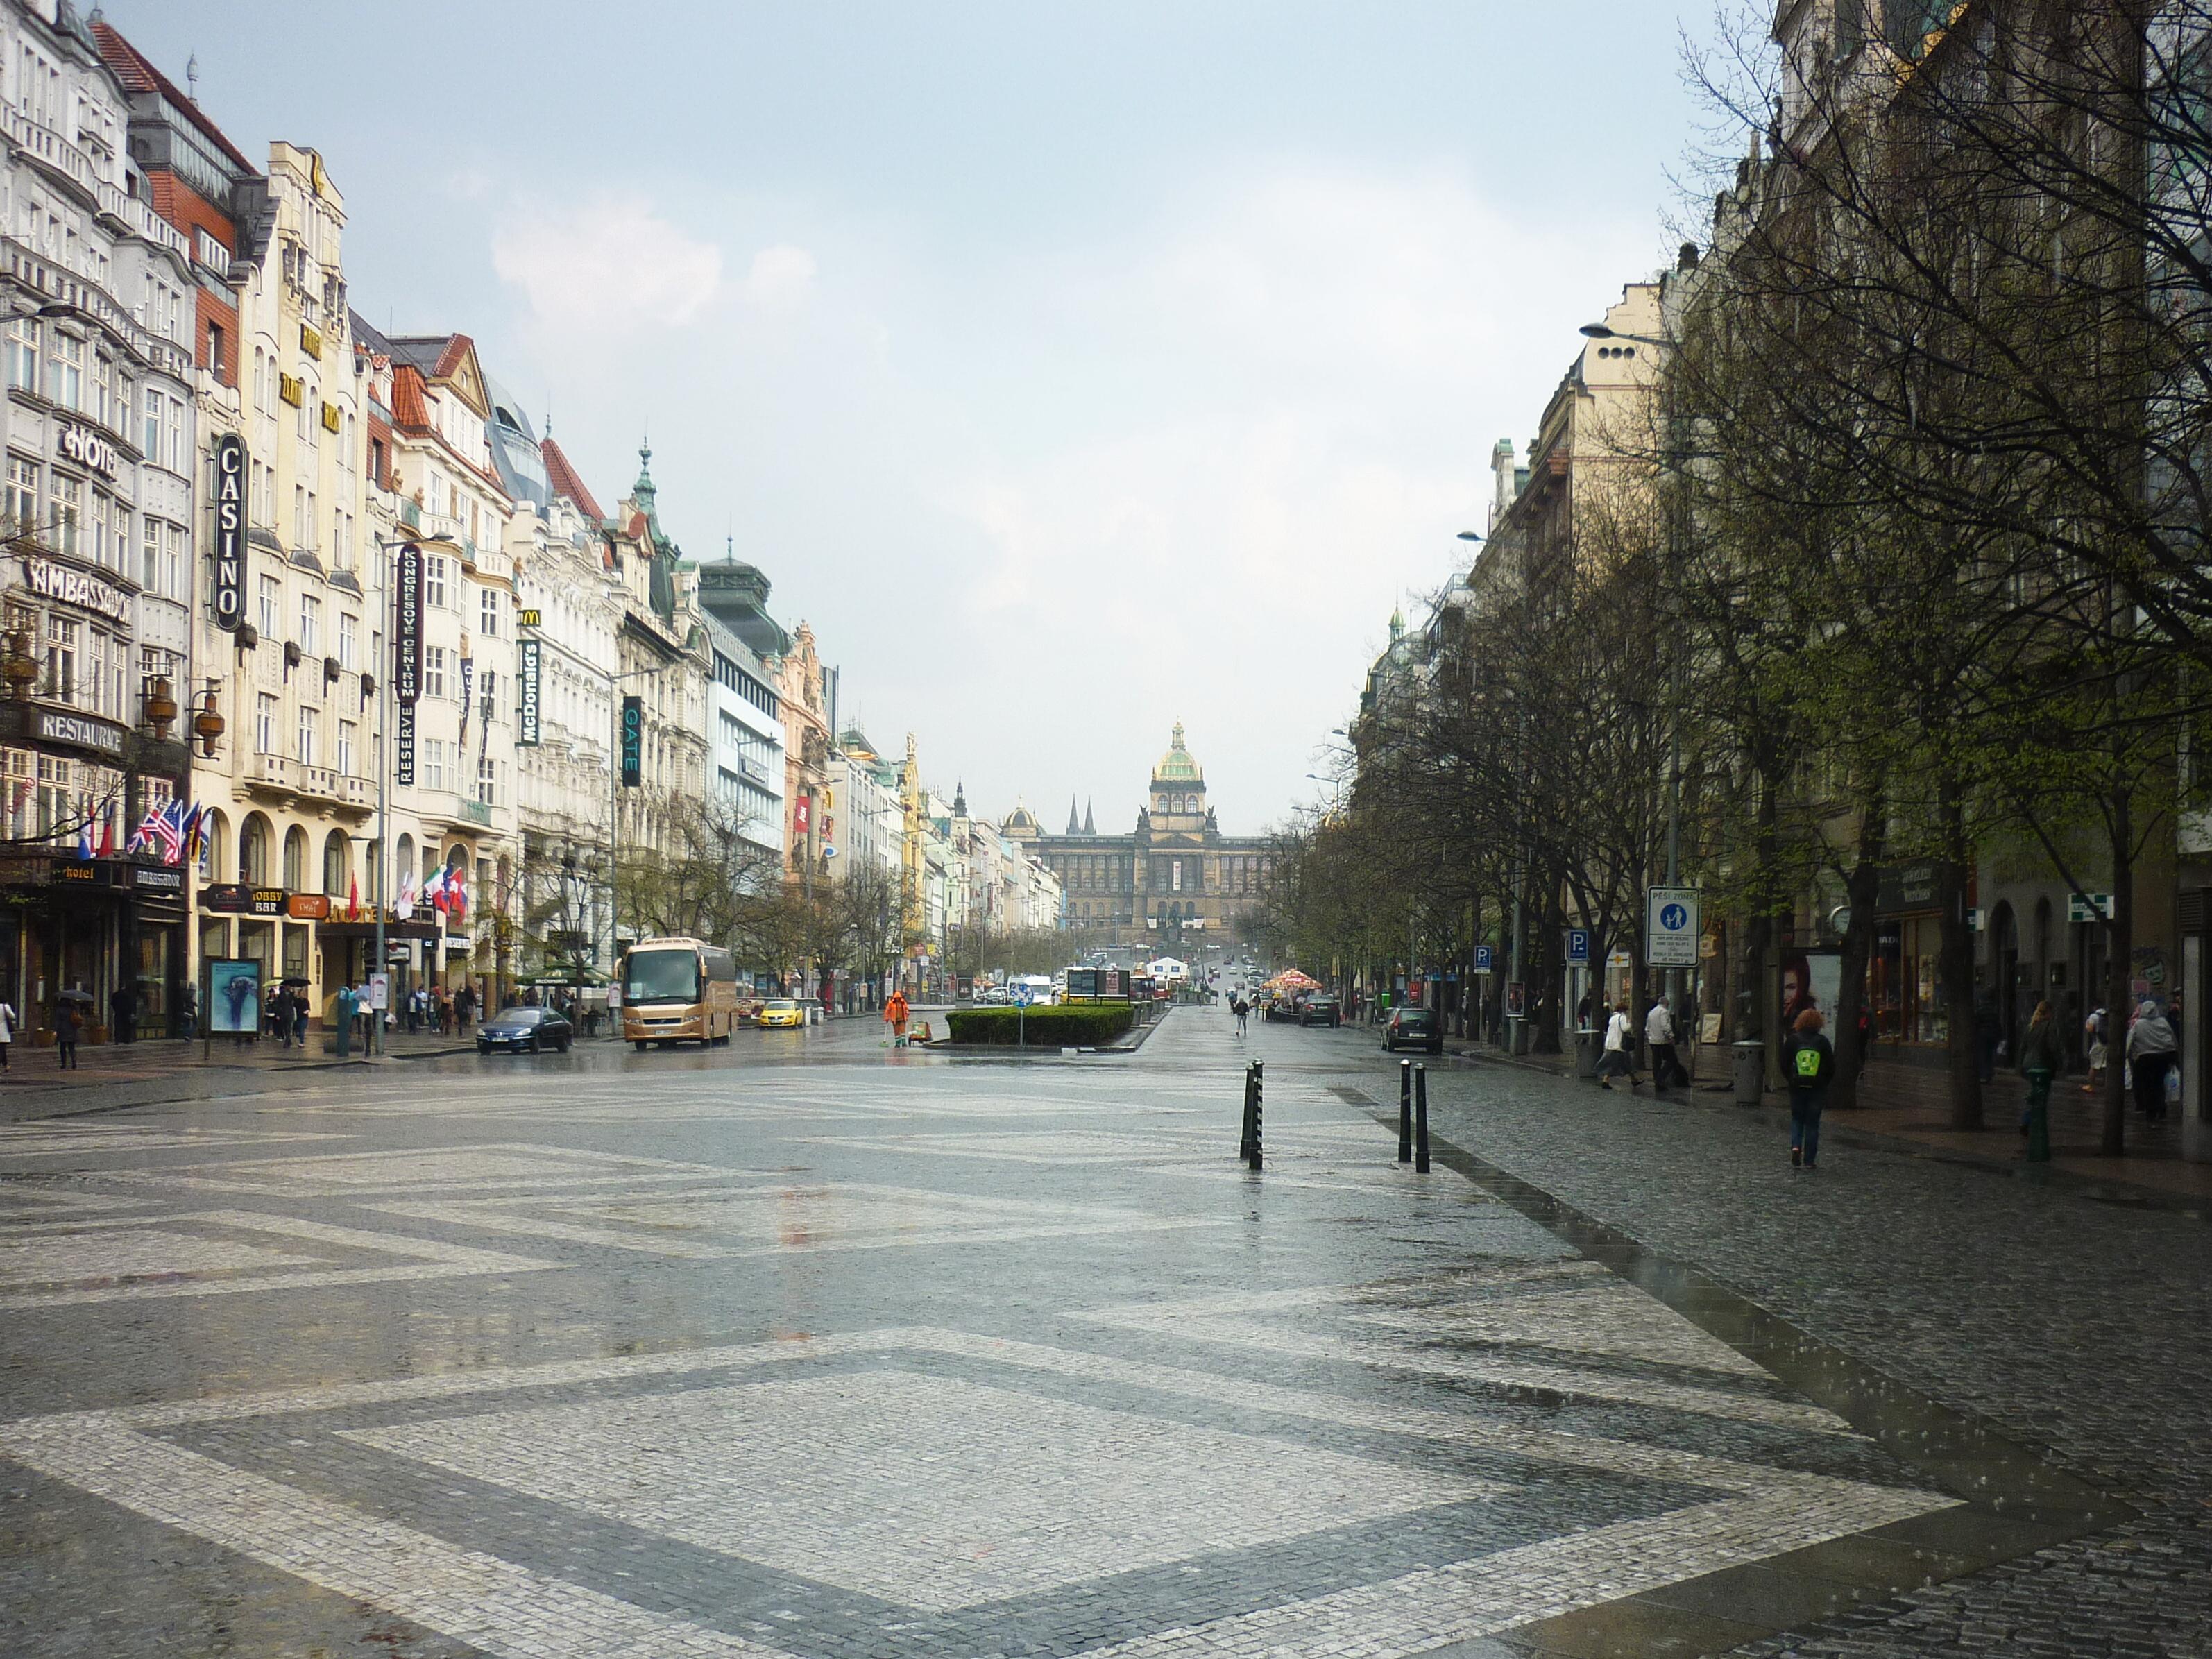 Cover image of this place Wenceslas Square